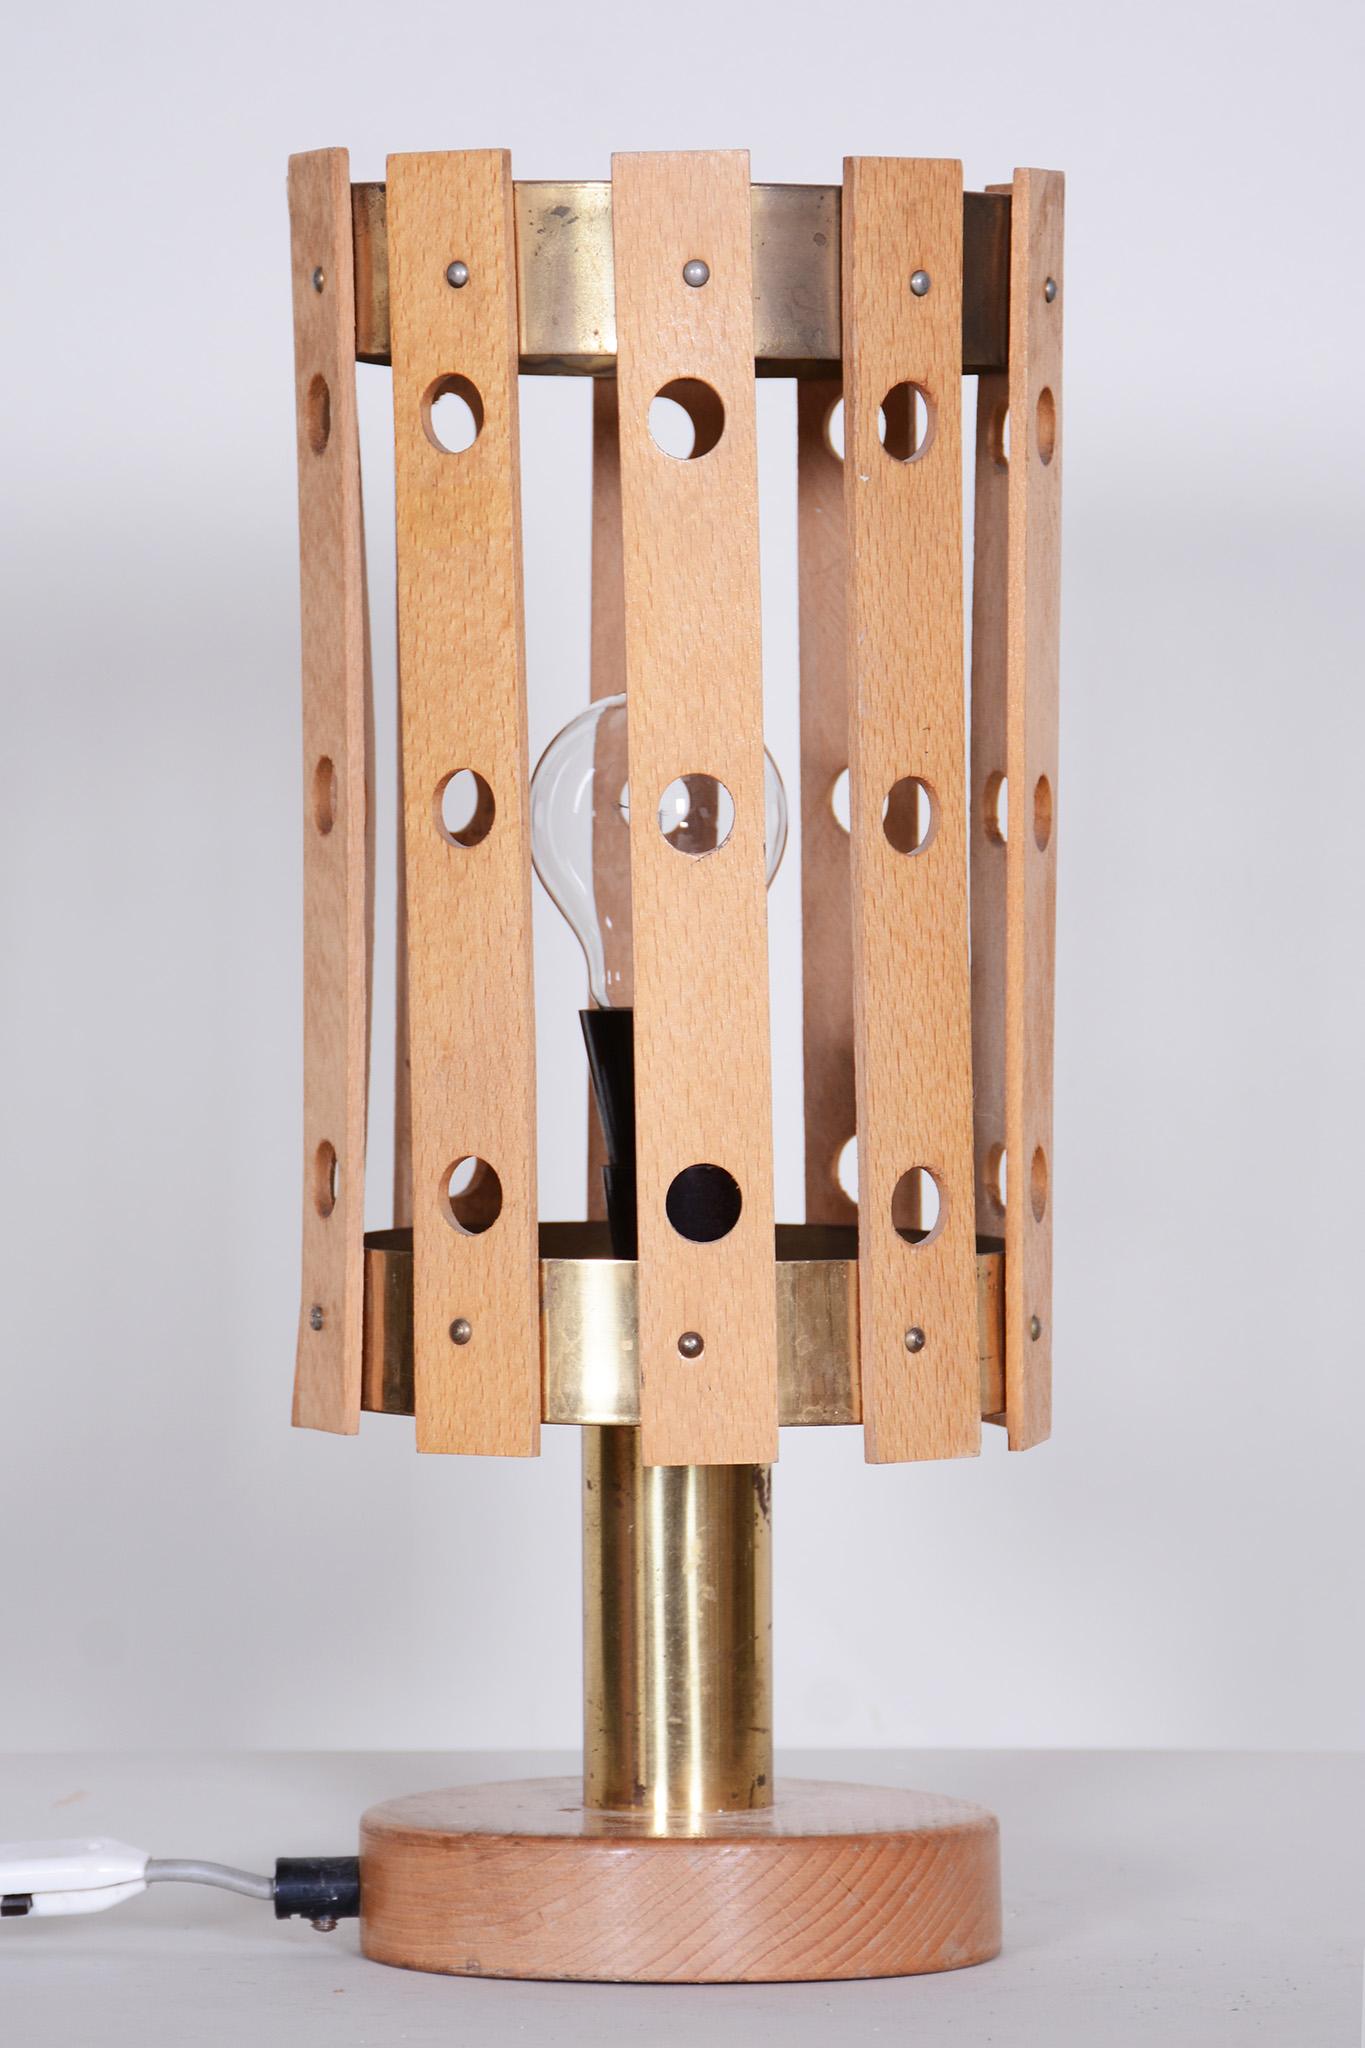 Midcentury Table Lamp, Beech, Brass, Made by Pokrok Zilina, Slovakia, 1960s For Sale 2